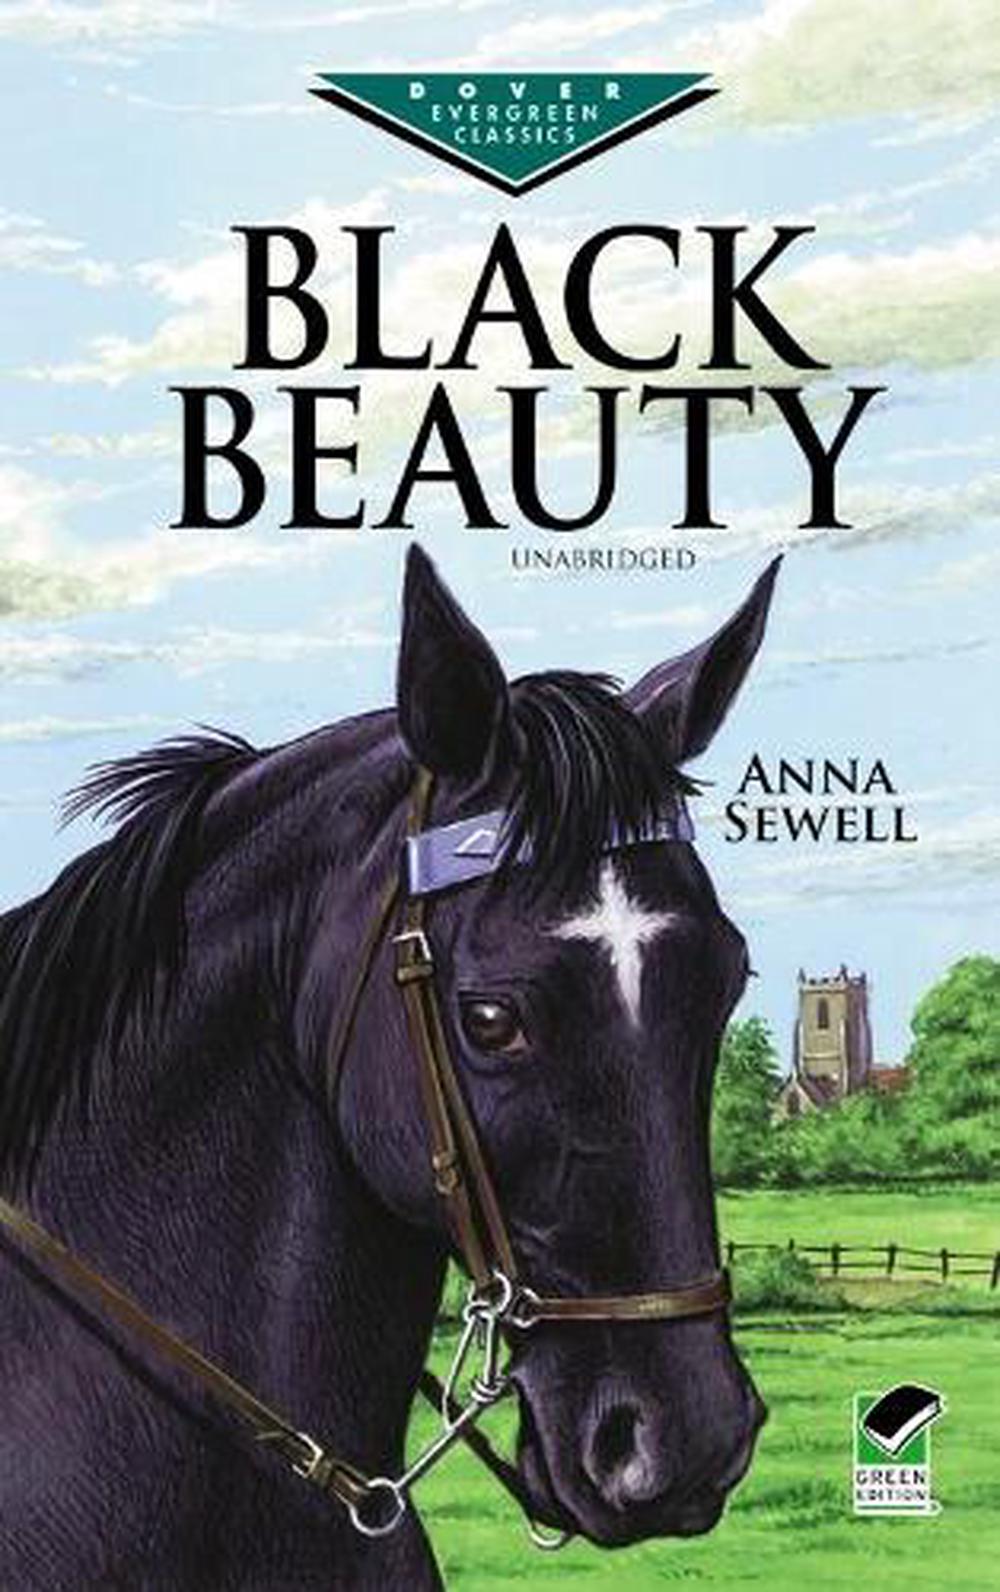 book review about black beauty